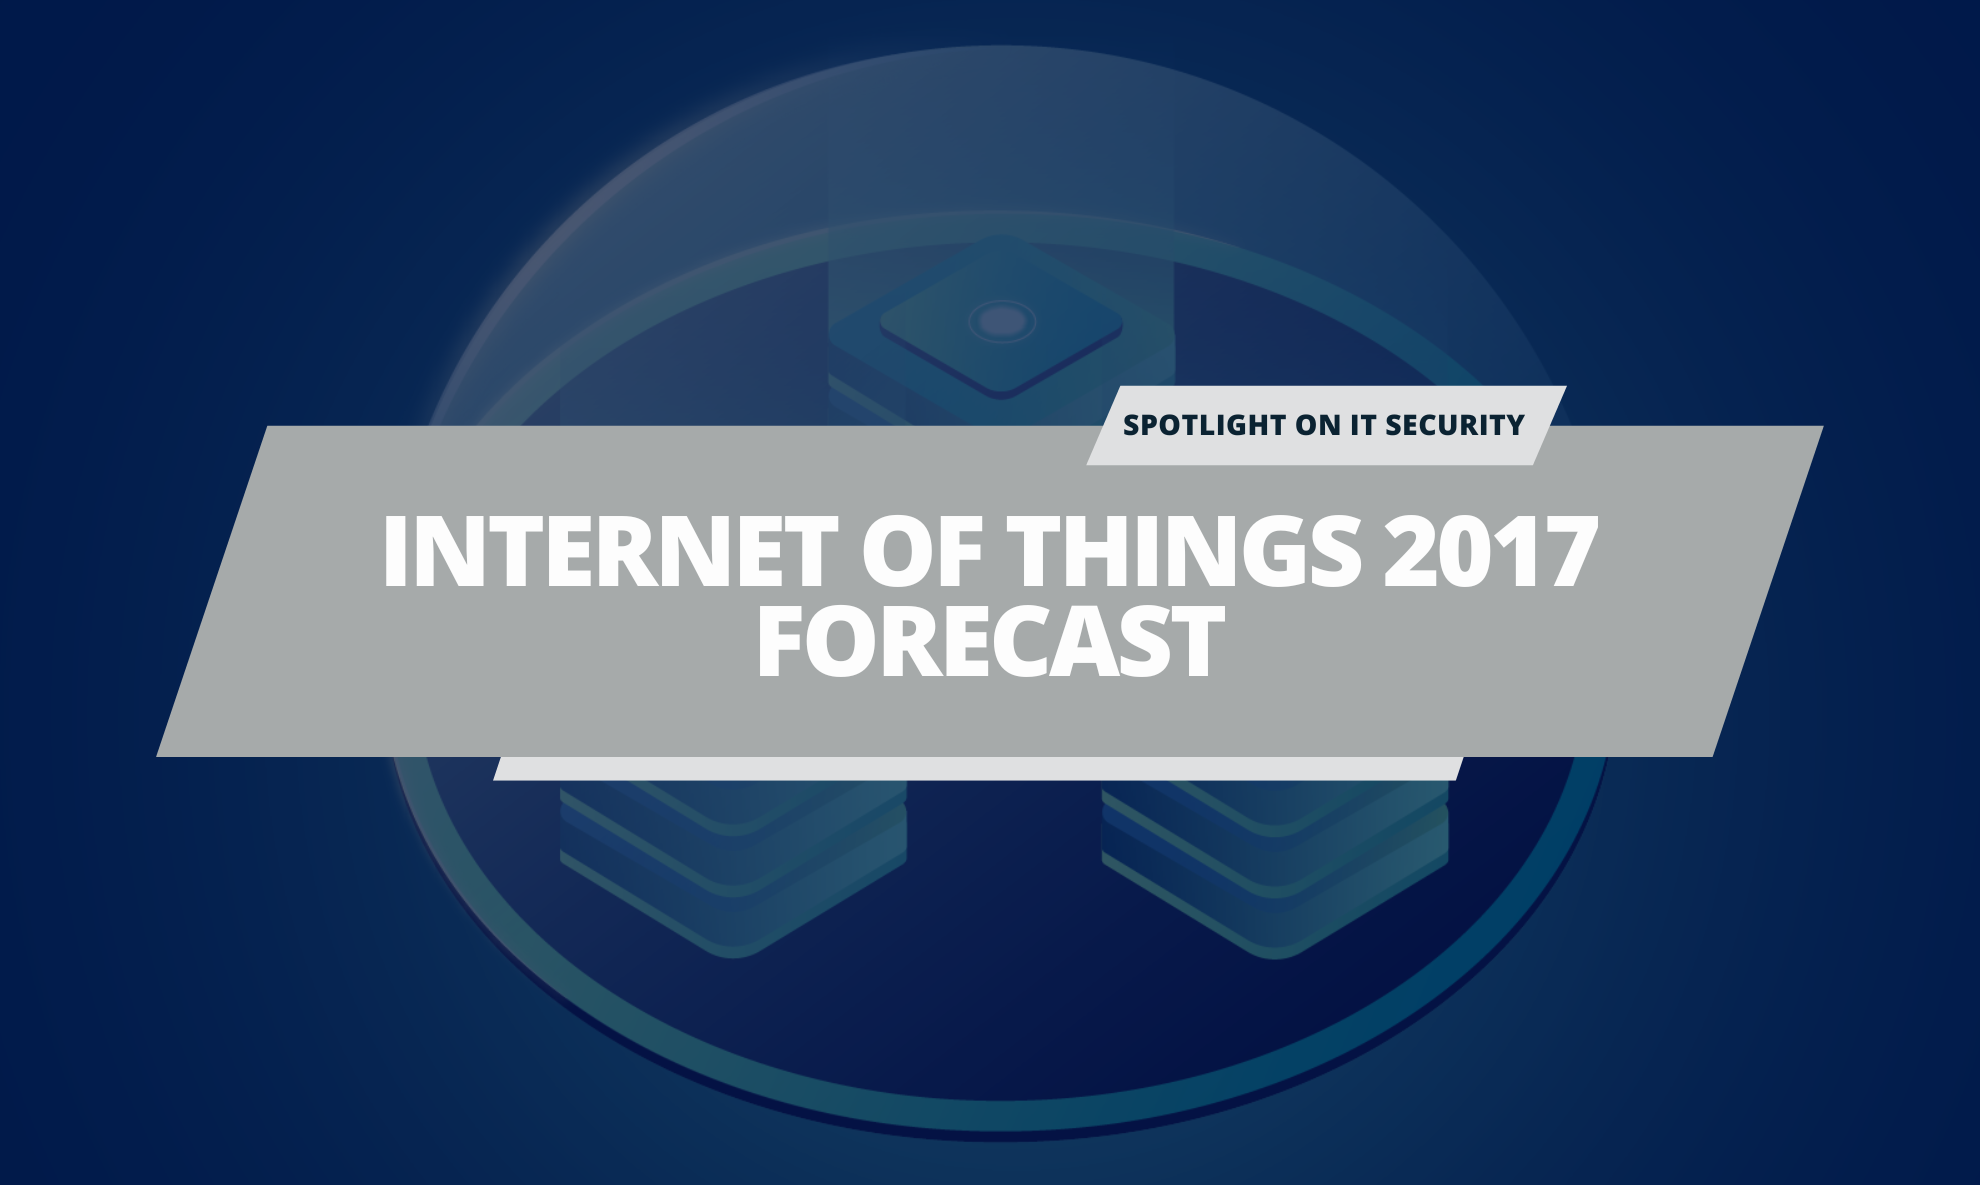 Internet of Things 2017 Forecast: Cyber Security, Cyber Insurance, and Digital Life Monitoring